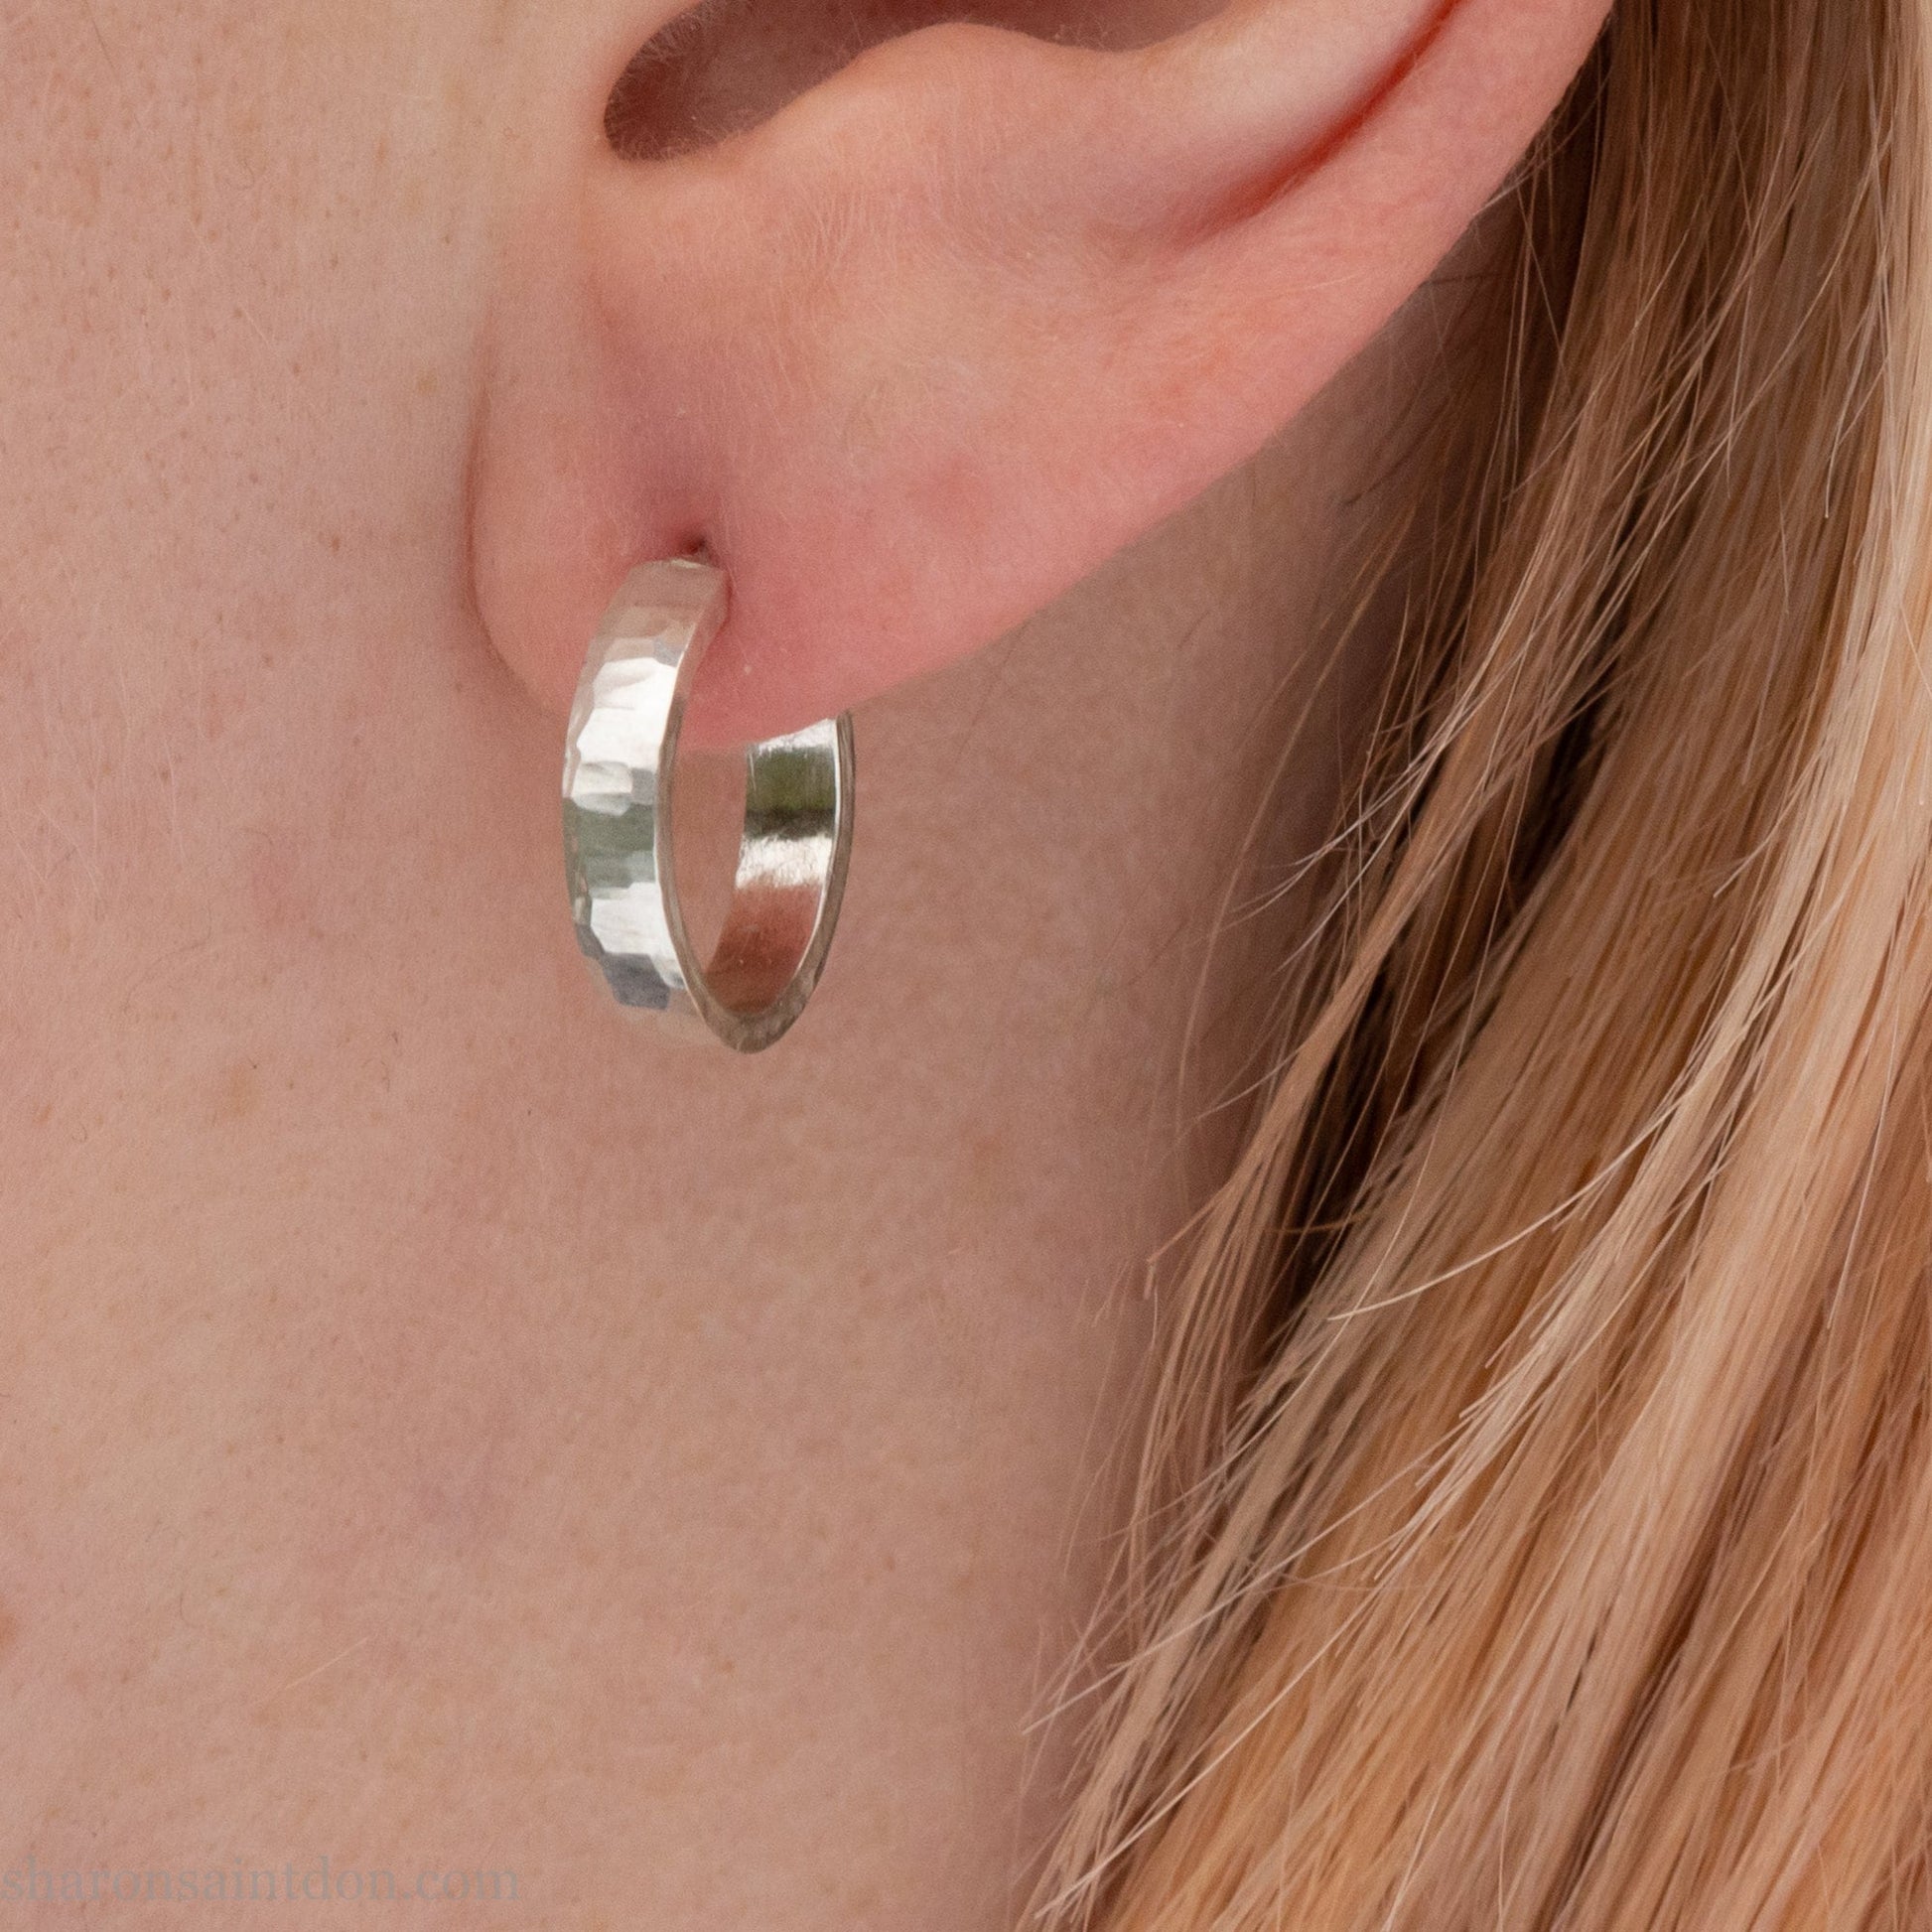 14mm x 3mm small sterling silver hoop earrings. Handmade in North America by Sharon SaintDon. Hammered solid silver with silver posts and backs.